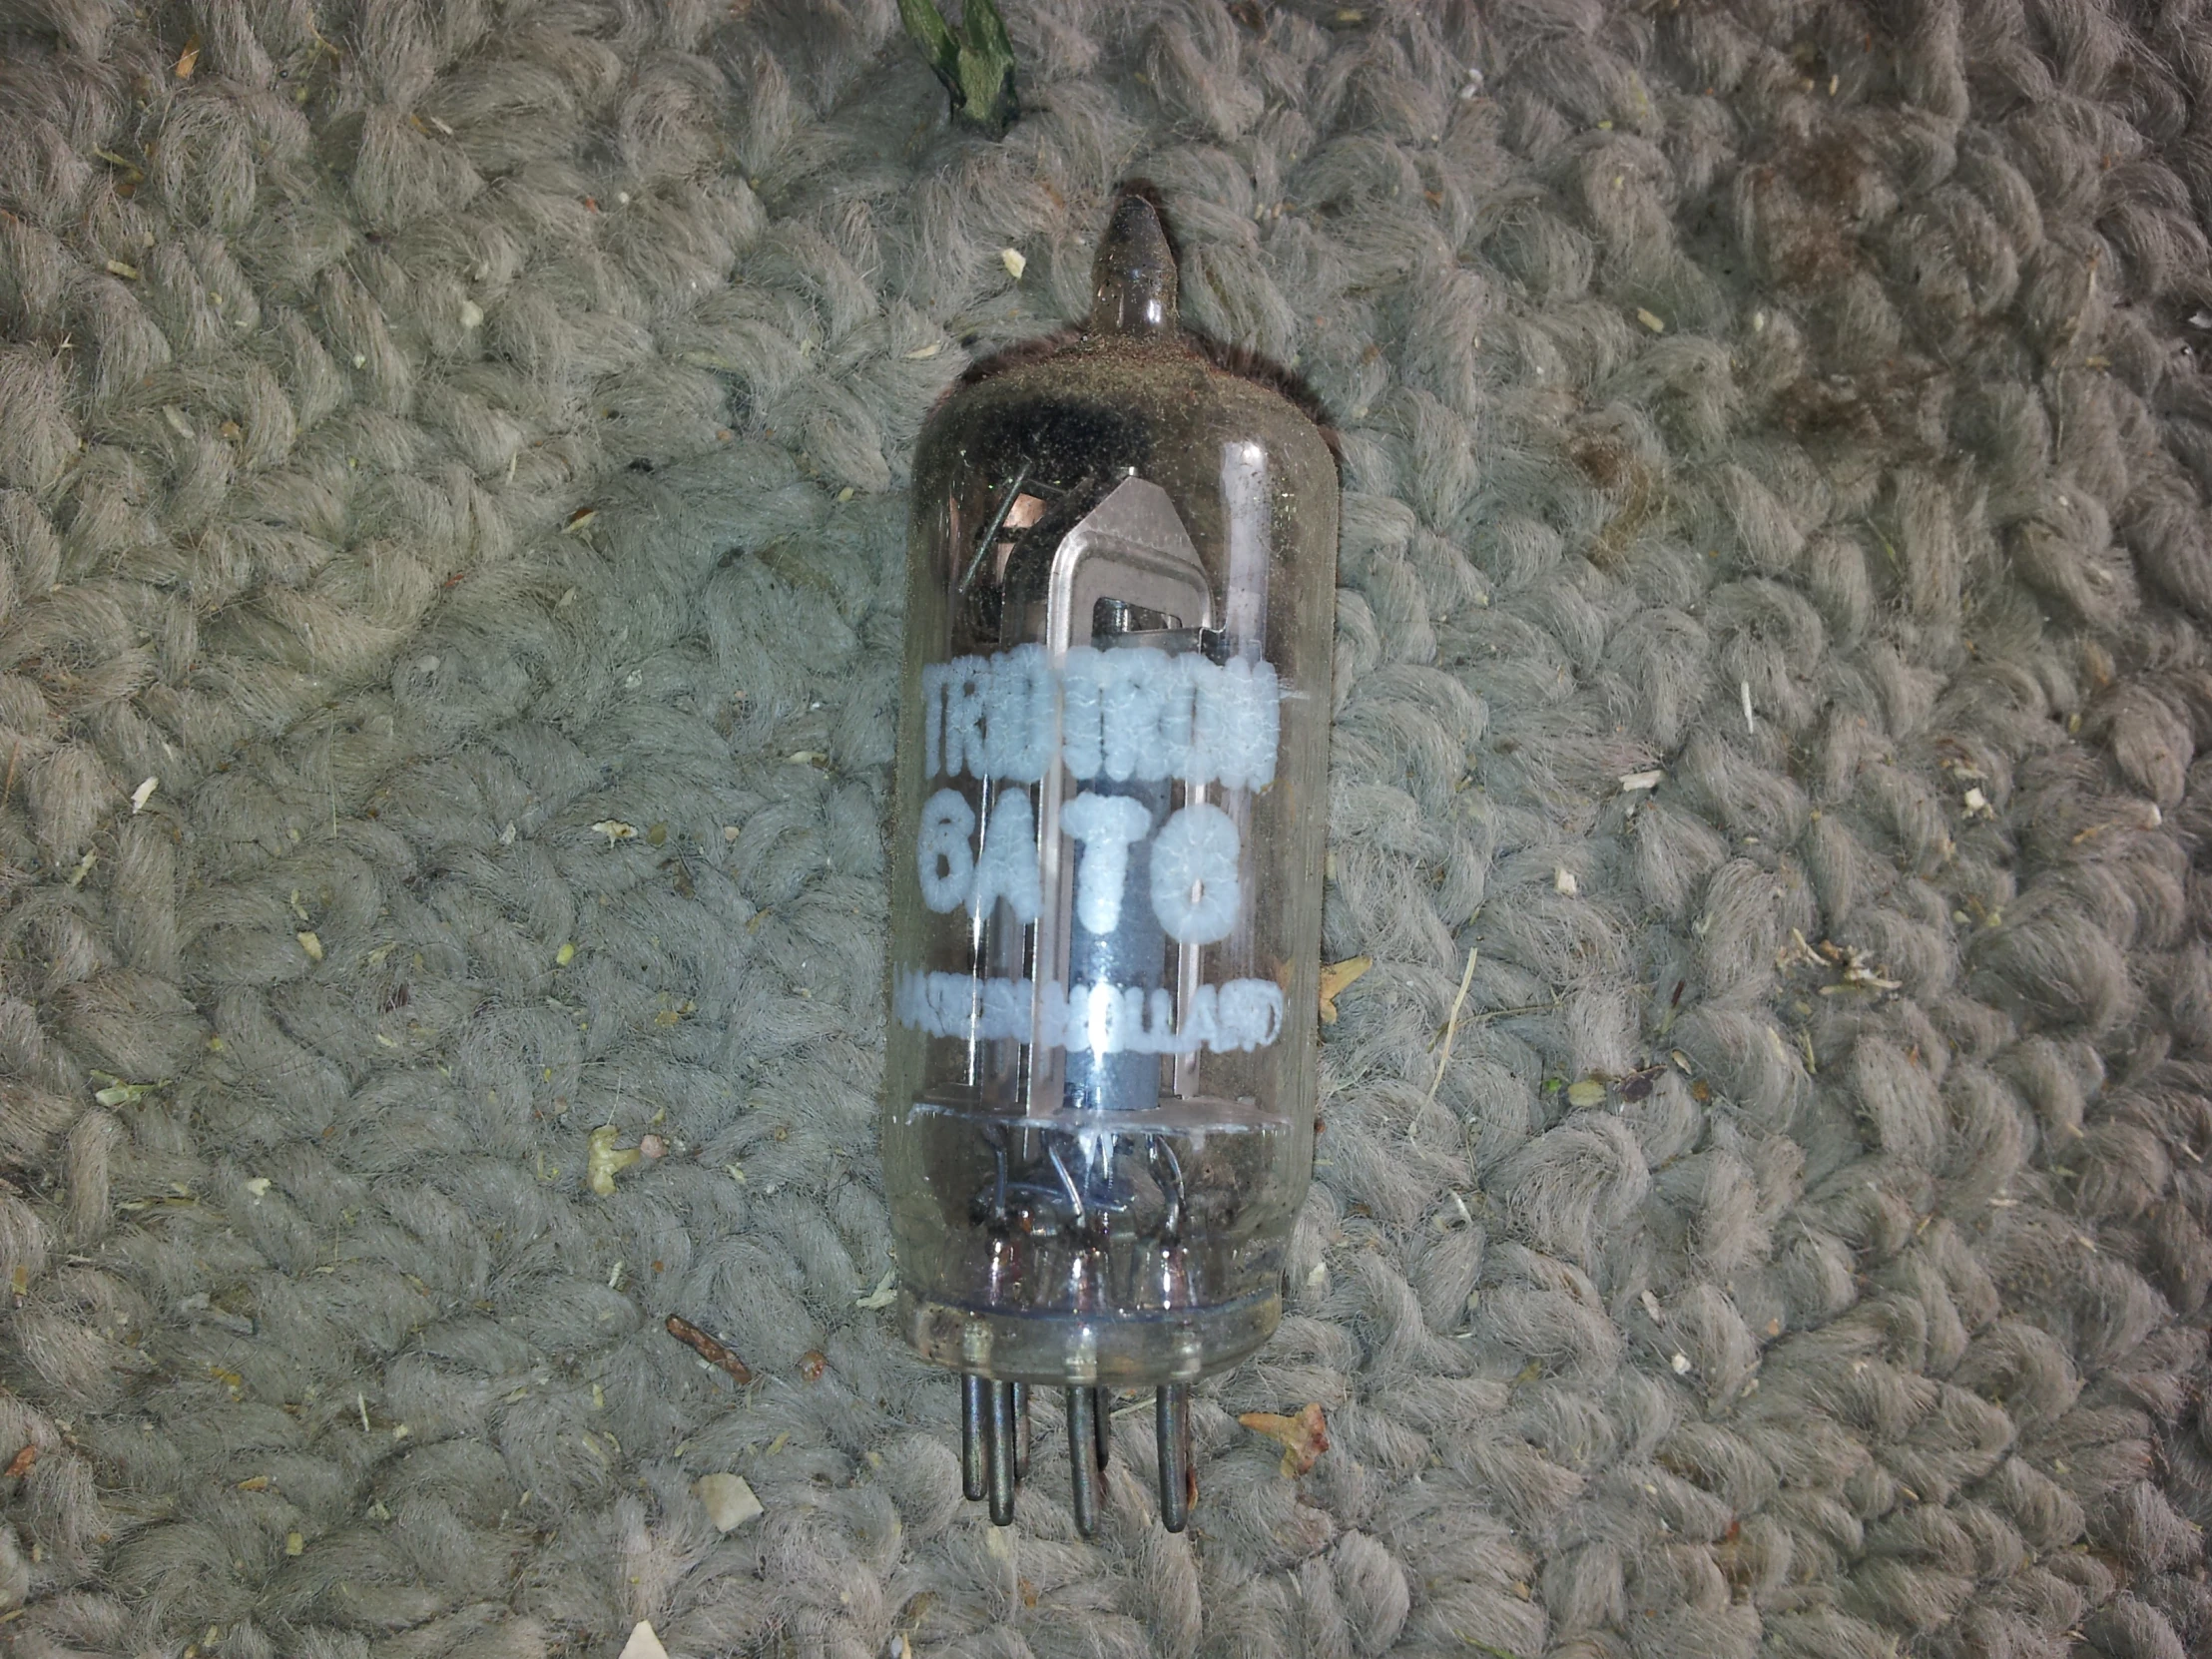 a dead object on the ground, one end of an empty plastic bottle